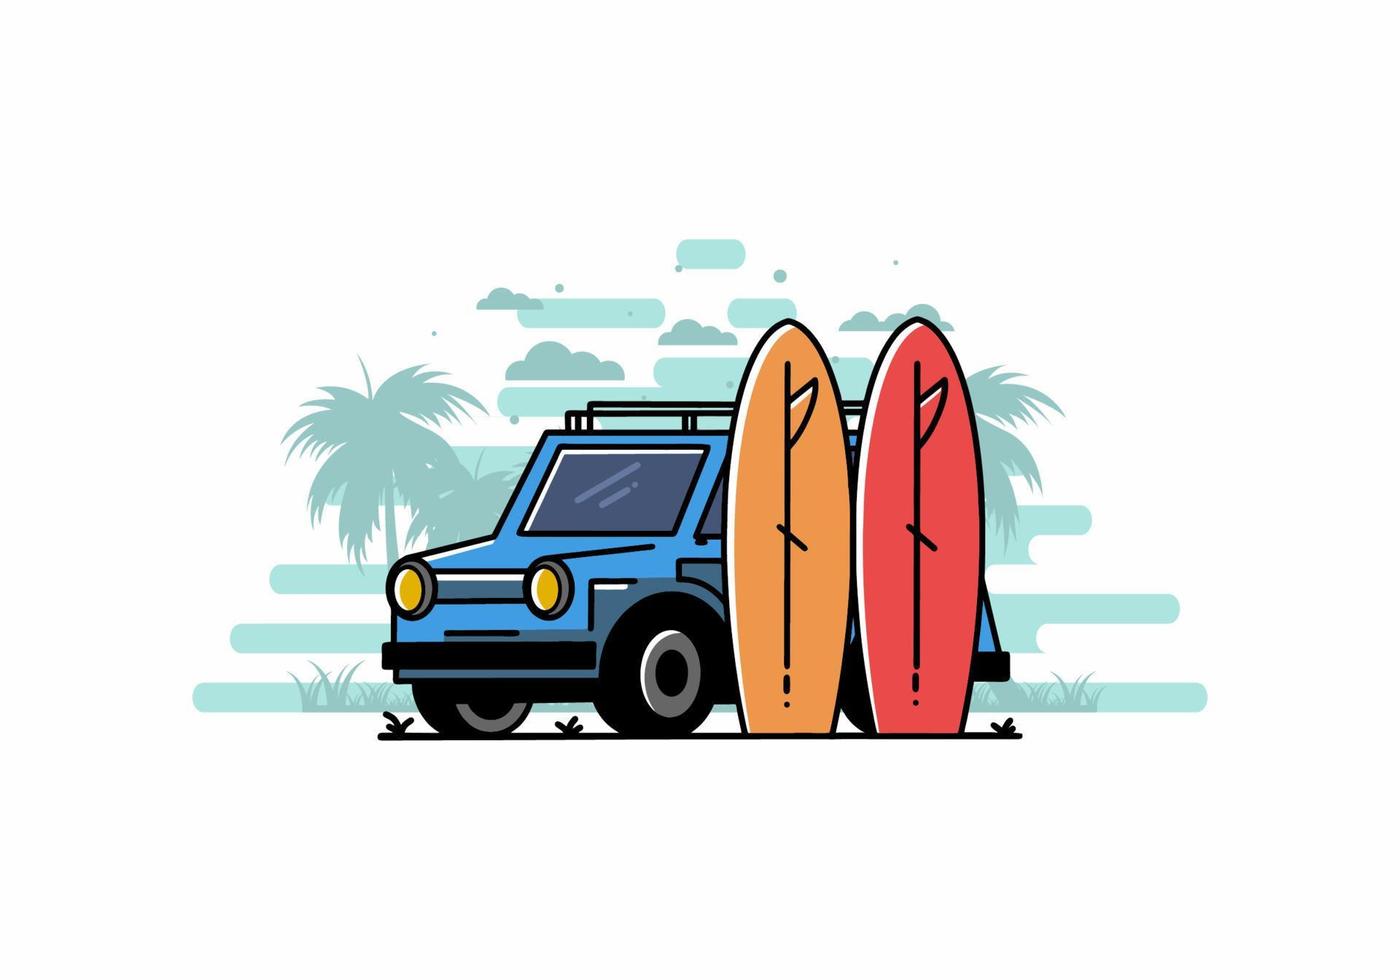 Small car and two surfboards illustration vector